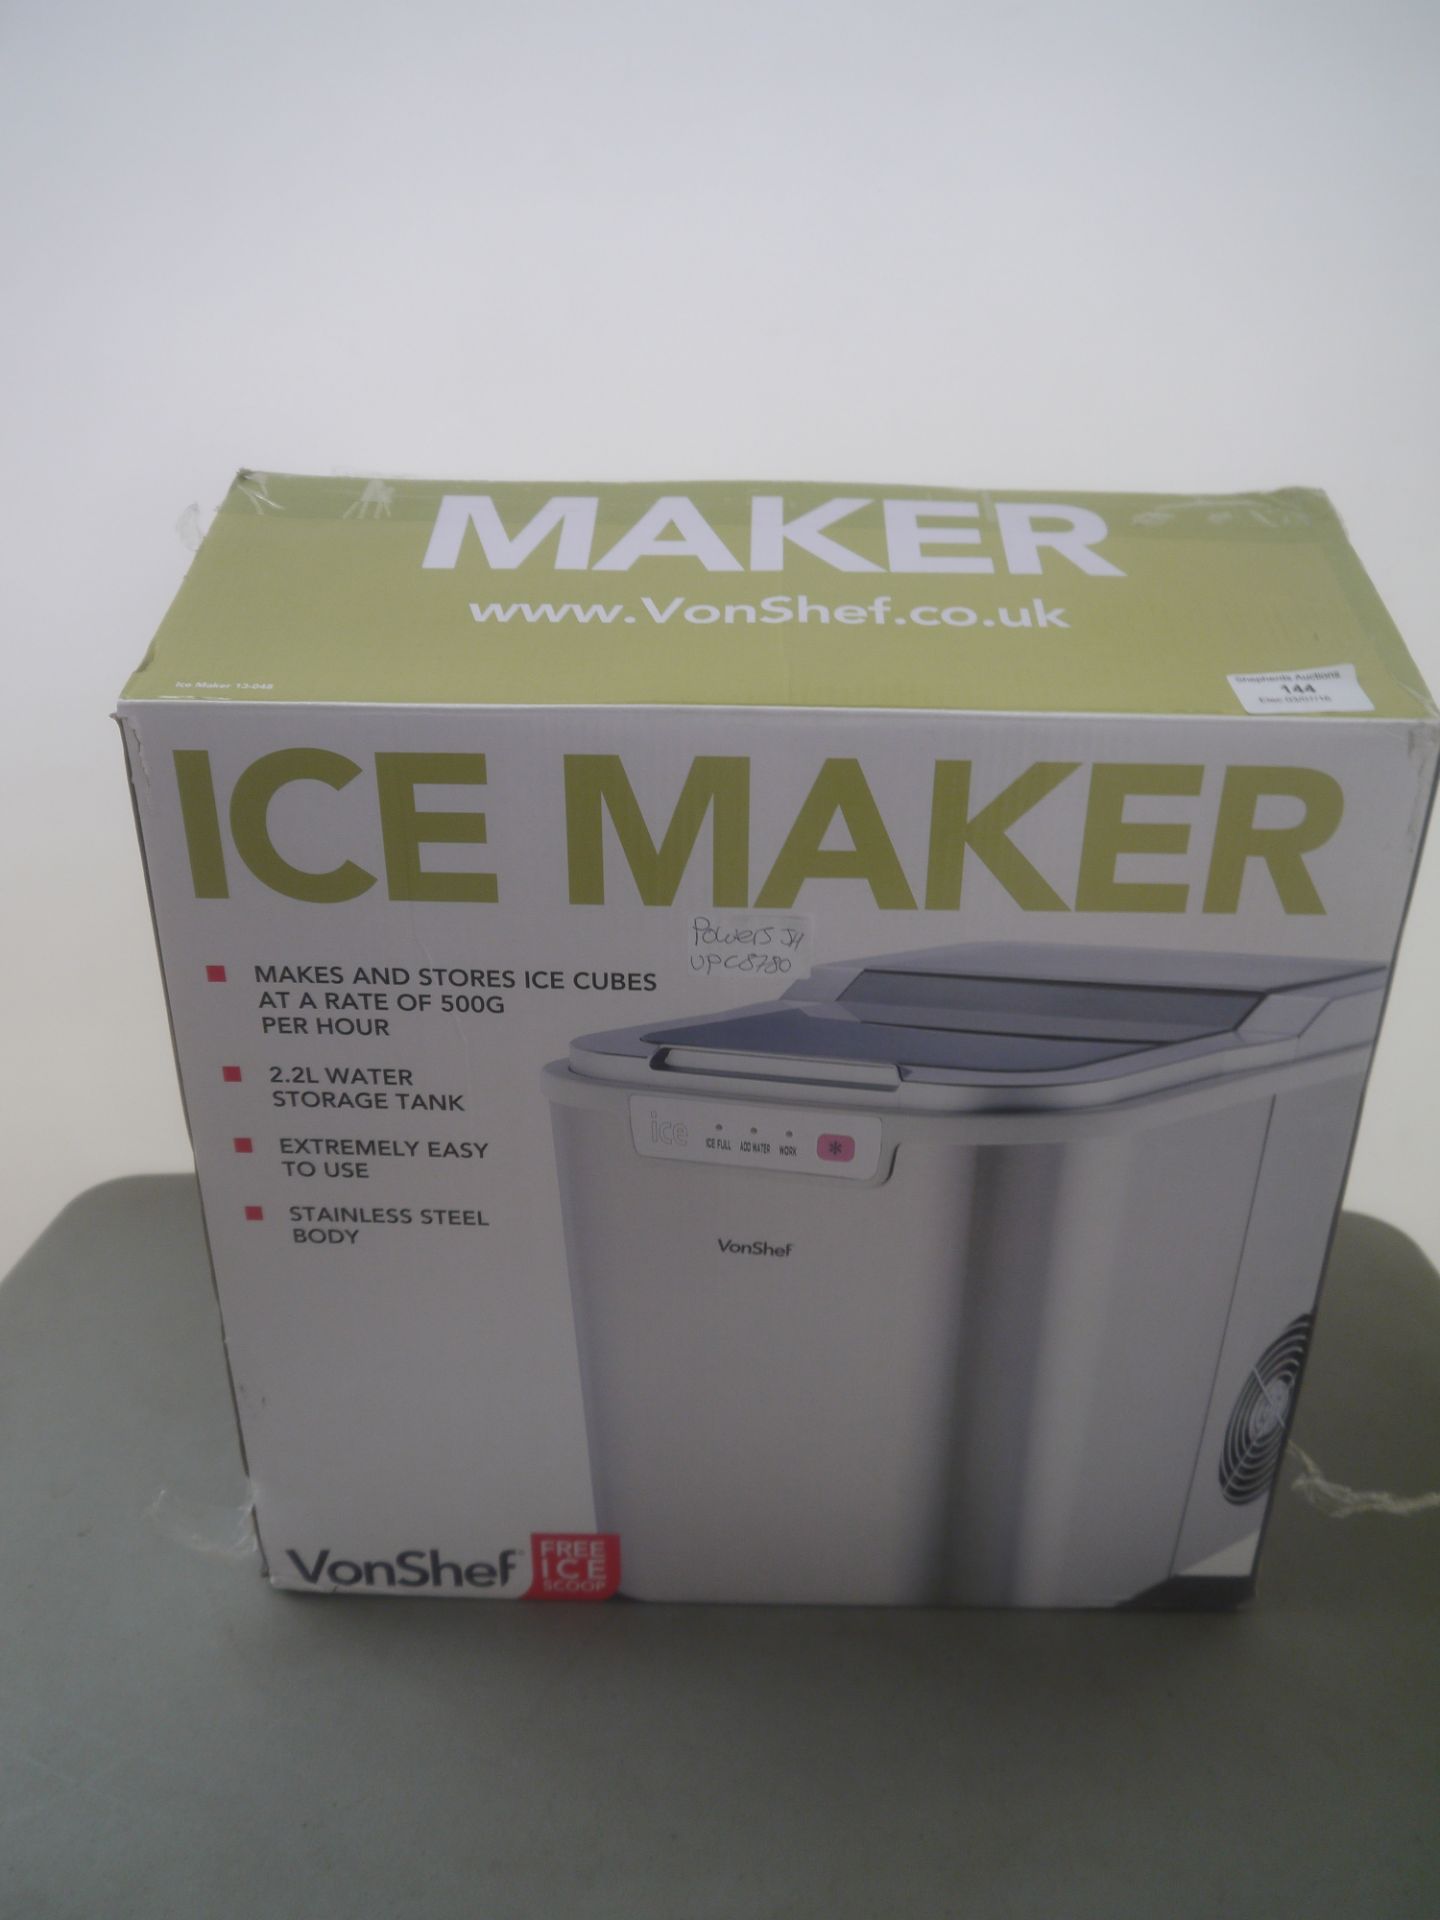 VonShef ice maker, 2.2L water storage tank, powers up and boxed.